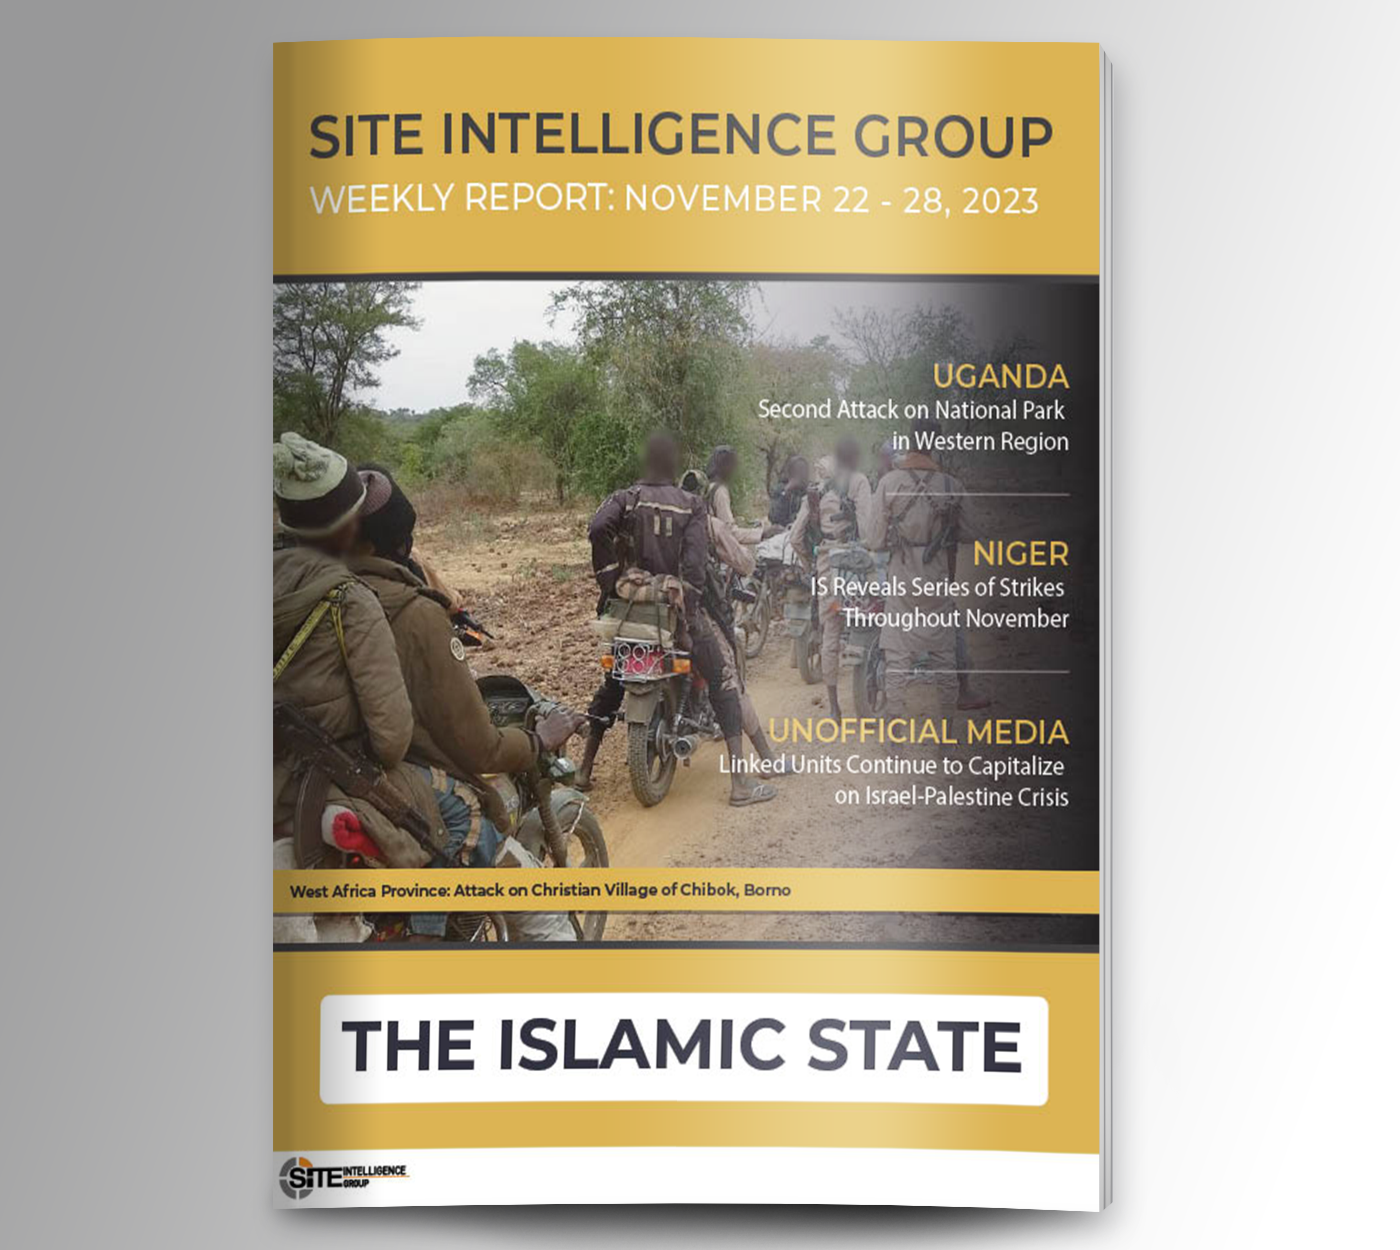 Weekly inSITE on the Islamic State for November 22-28, 2023